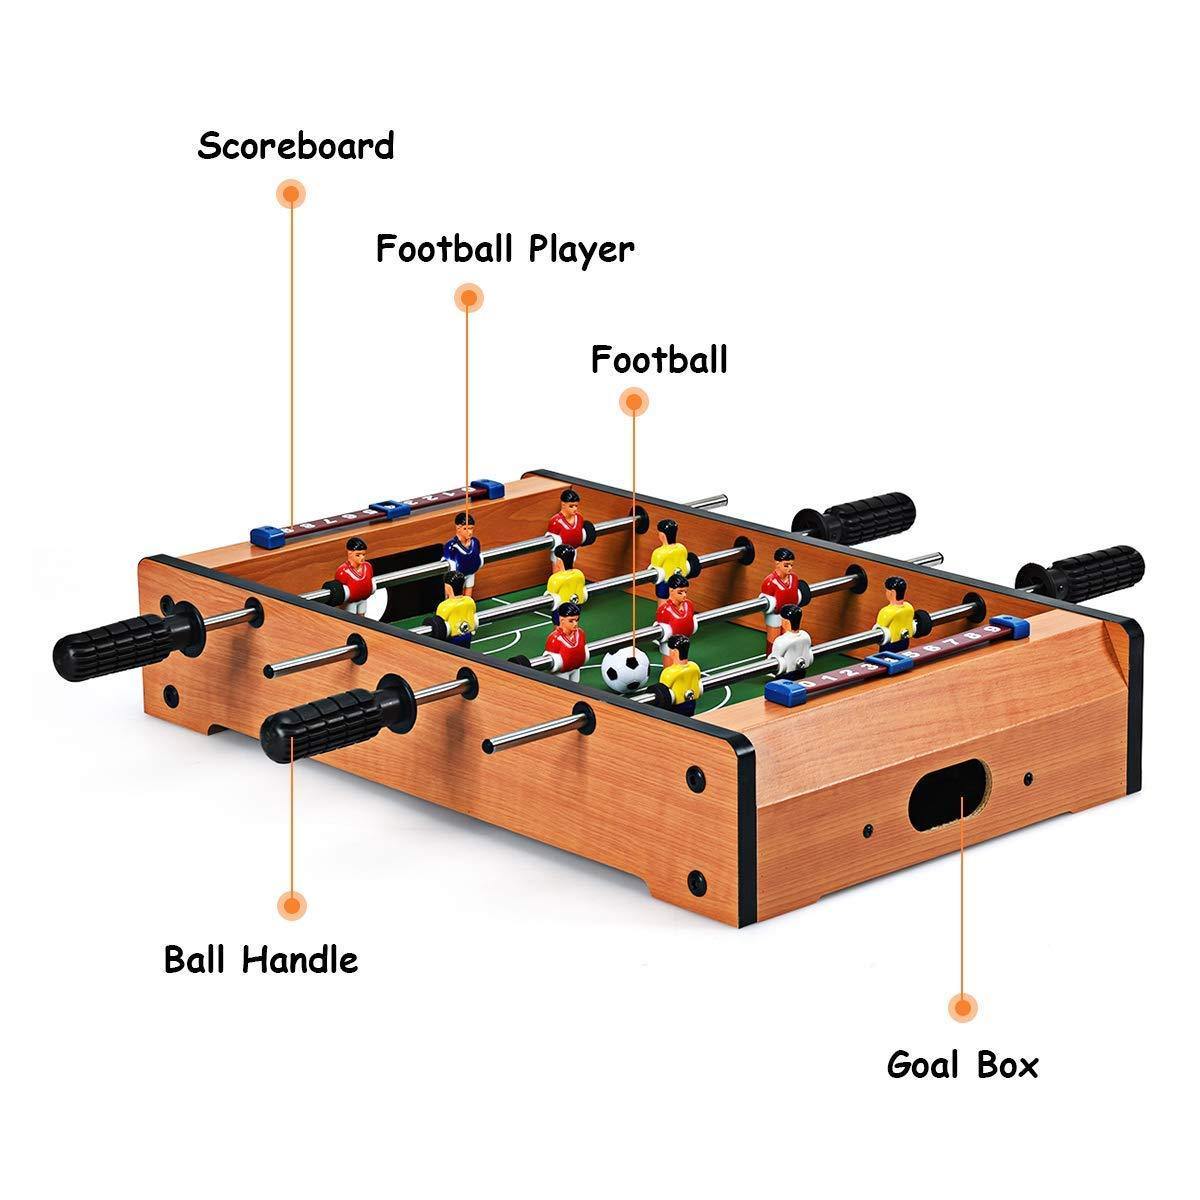 Prokick Mid-Sized Foosball, Mini Football, Table Soccer Game (51 Cms) with 2 Balls, 4 Rods and Score Keeper - Best Price online Prokicksports.com